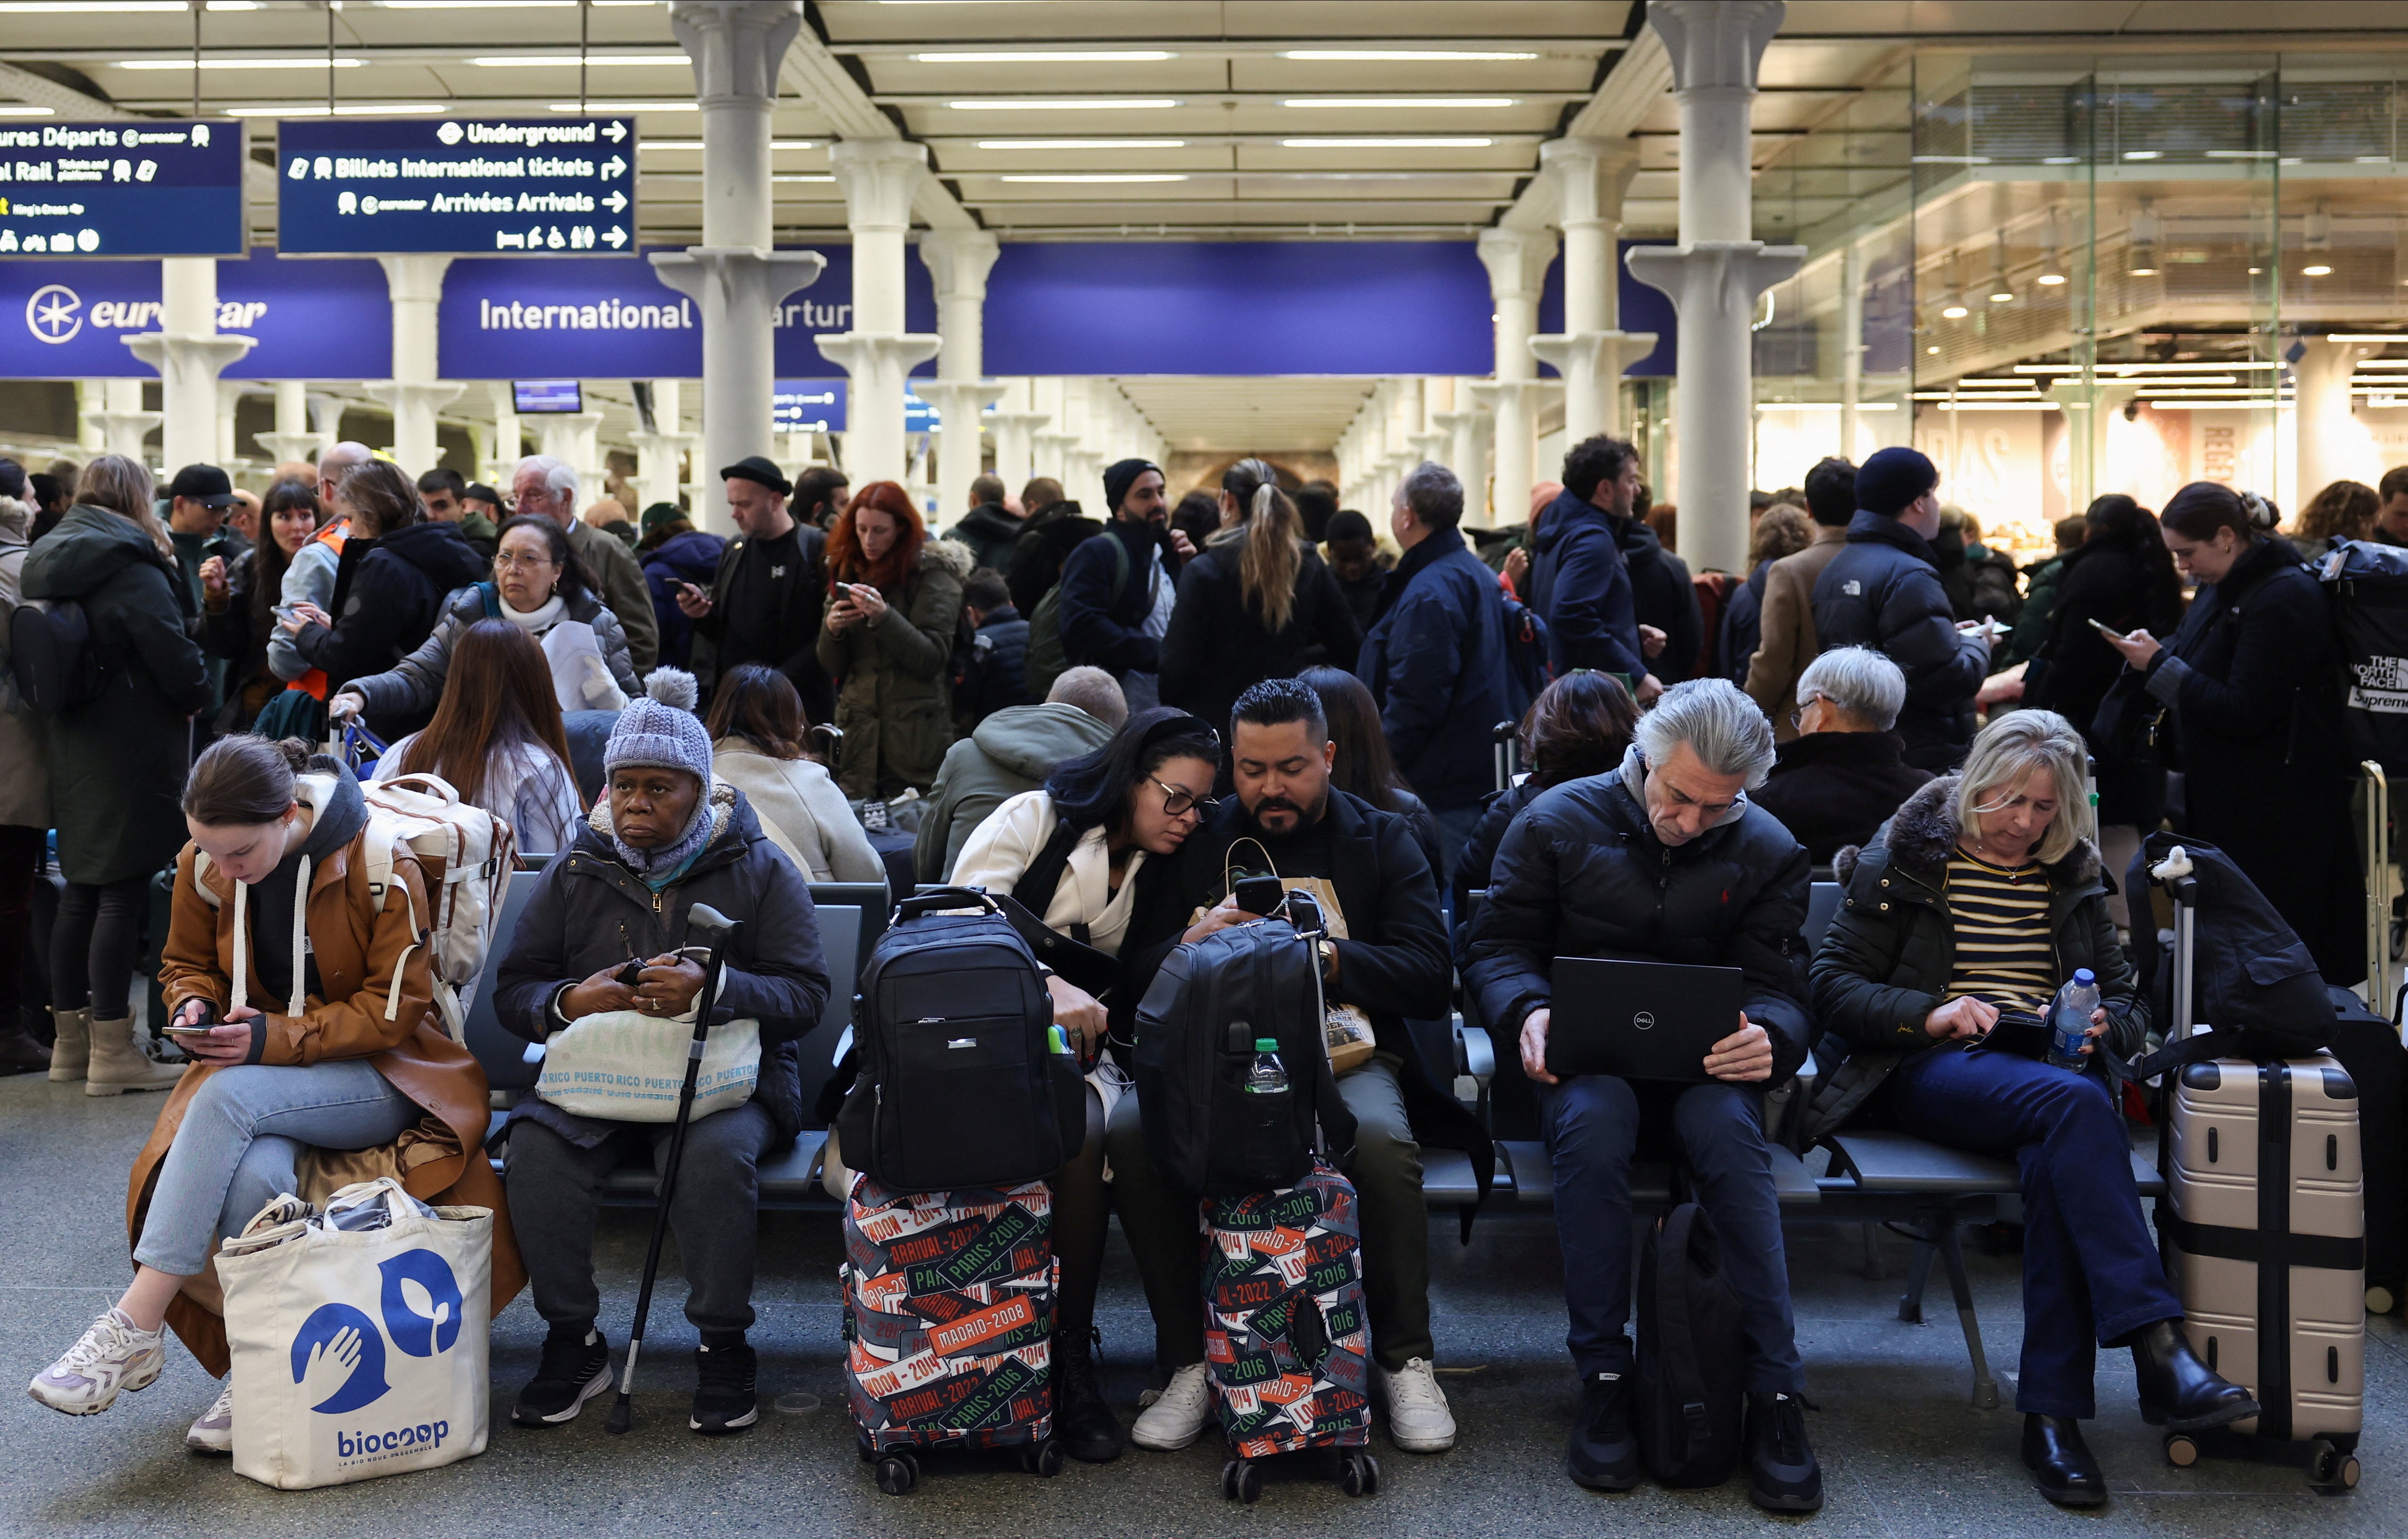 pPassengers wait at the Eurostar terminal at St Pancras International as an unexpected strike held up travel plans/p